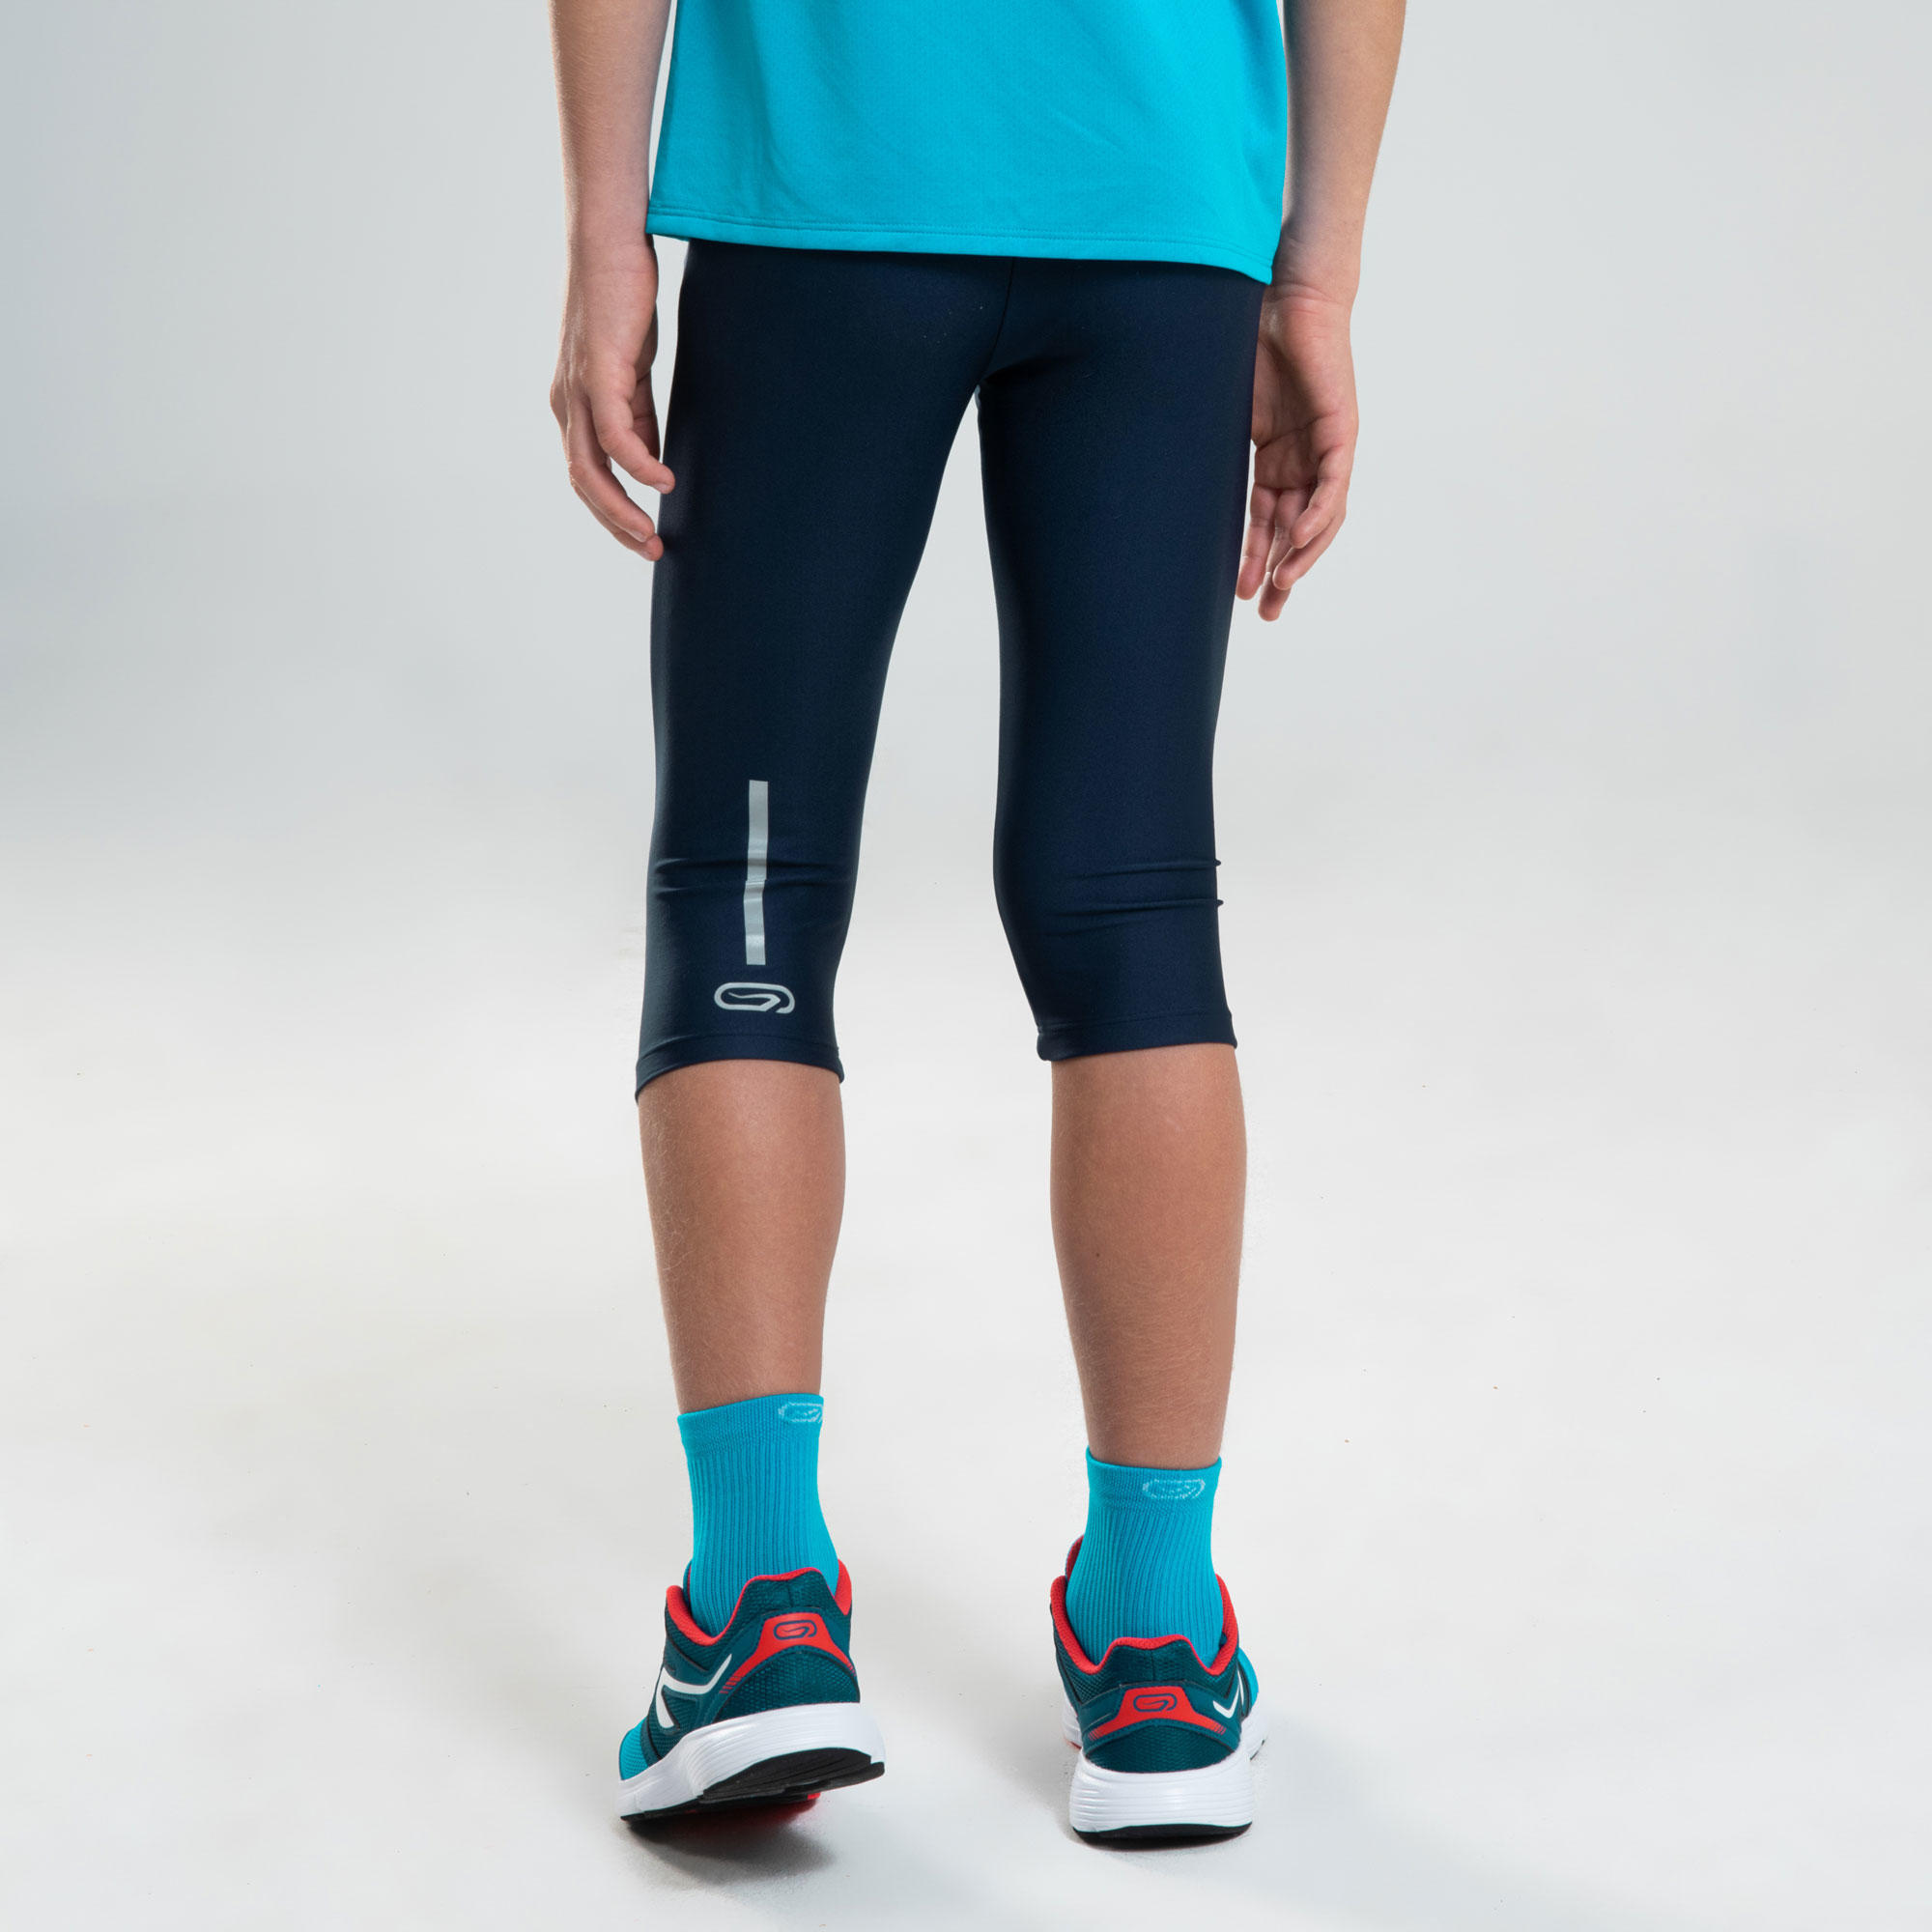 AT 100 KIDS' ATHLETICS CROPPED BOTTOMS - NAVY BLUE/TURQUOISE 5/6